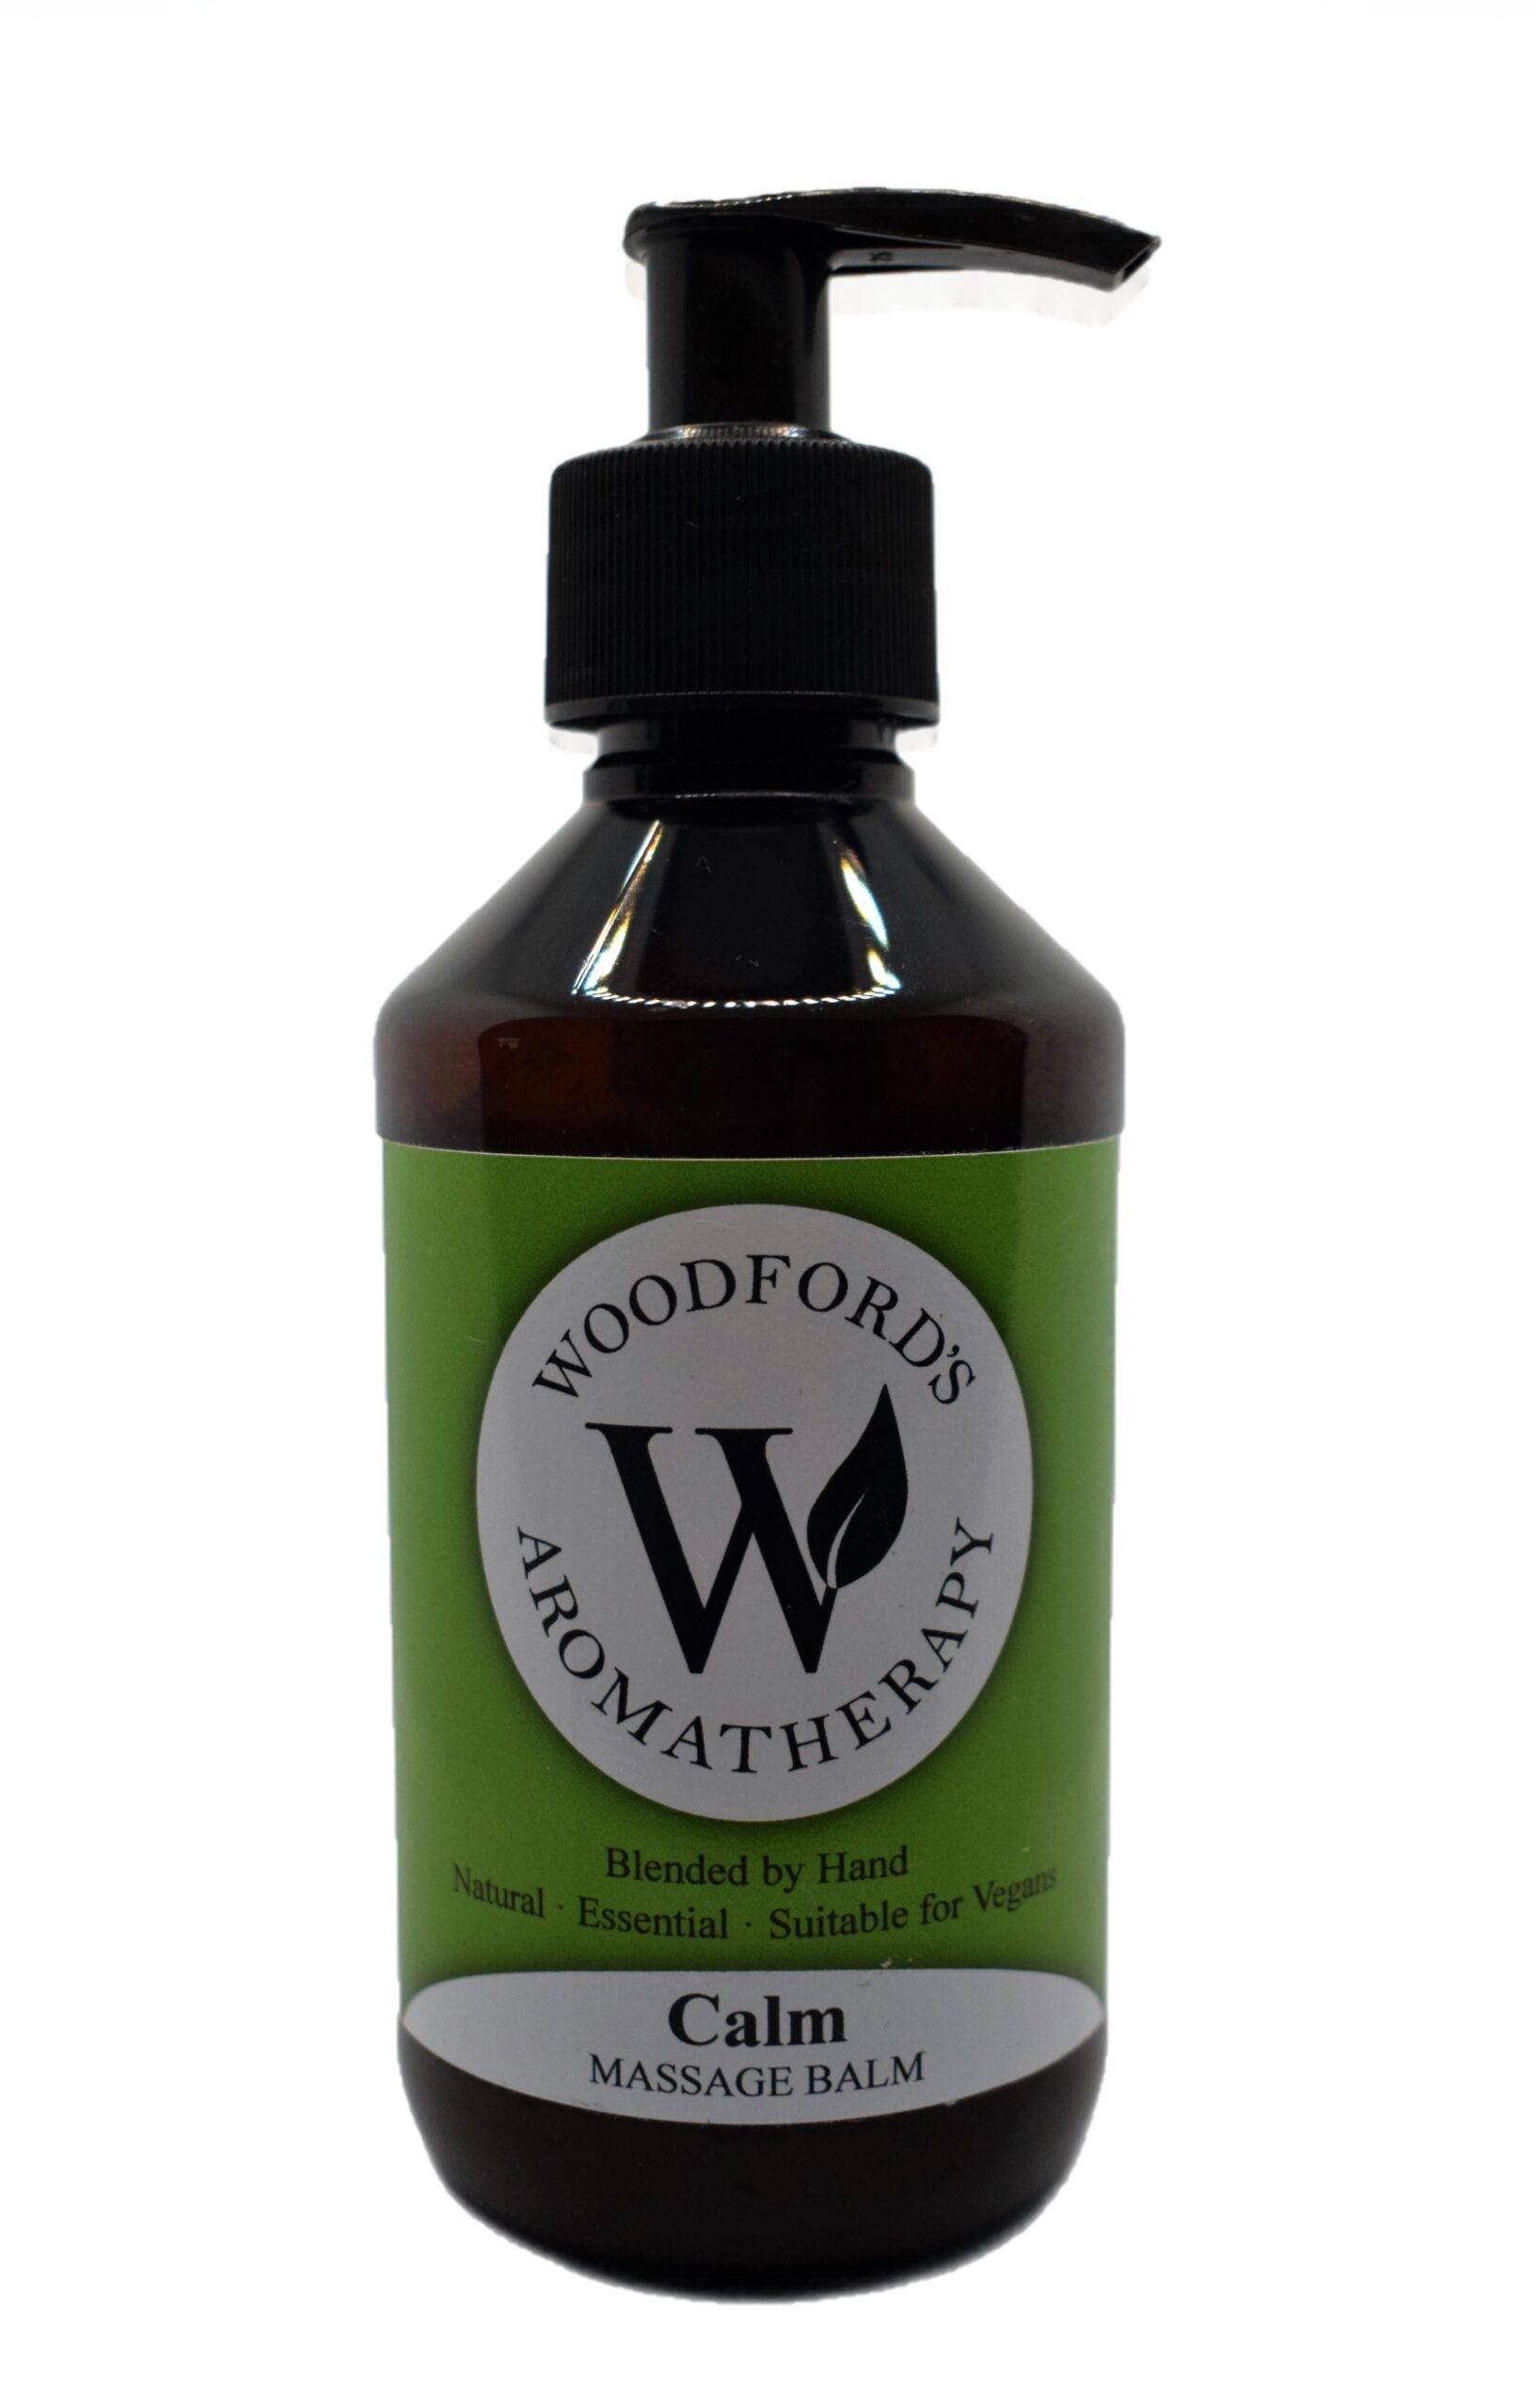 Product Calm – Stress Relieving Massage Balm - Woodfords Aromatherapy image